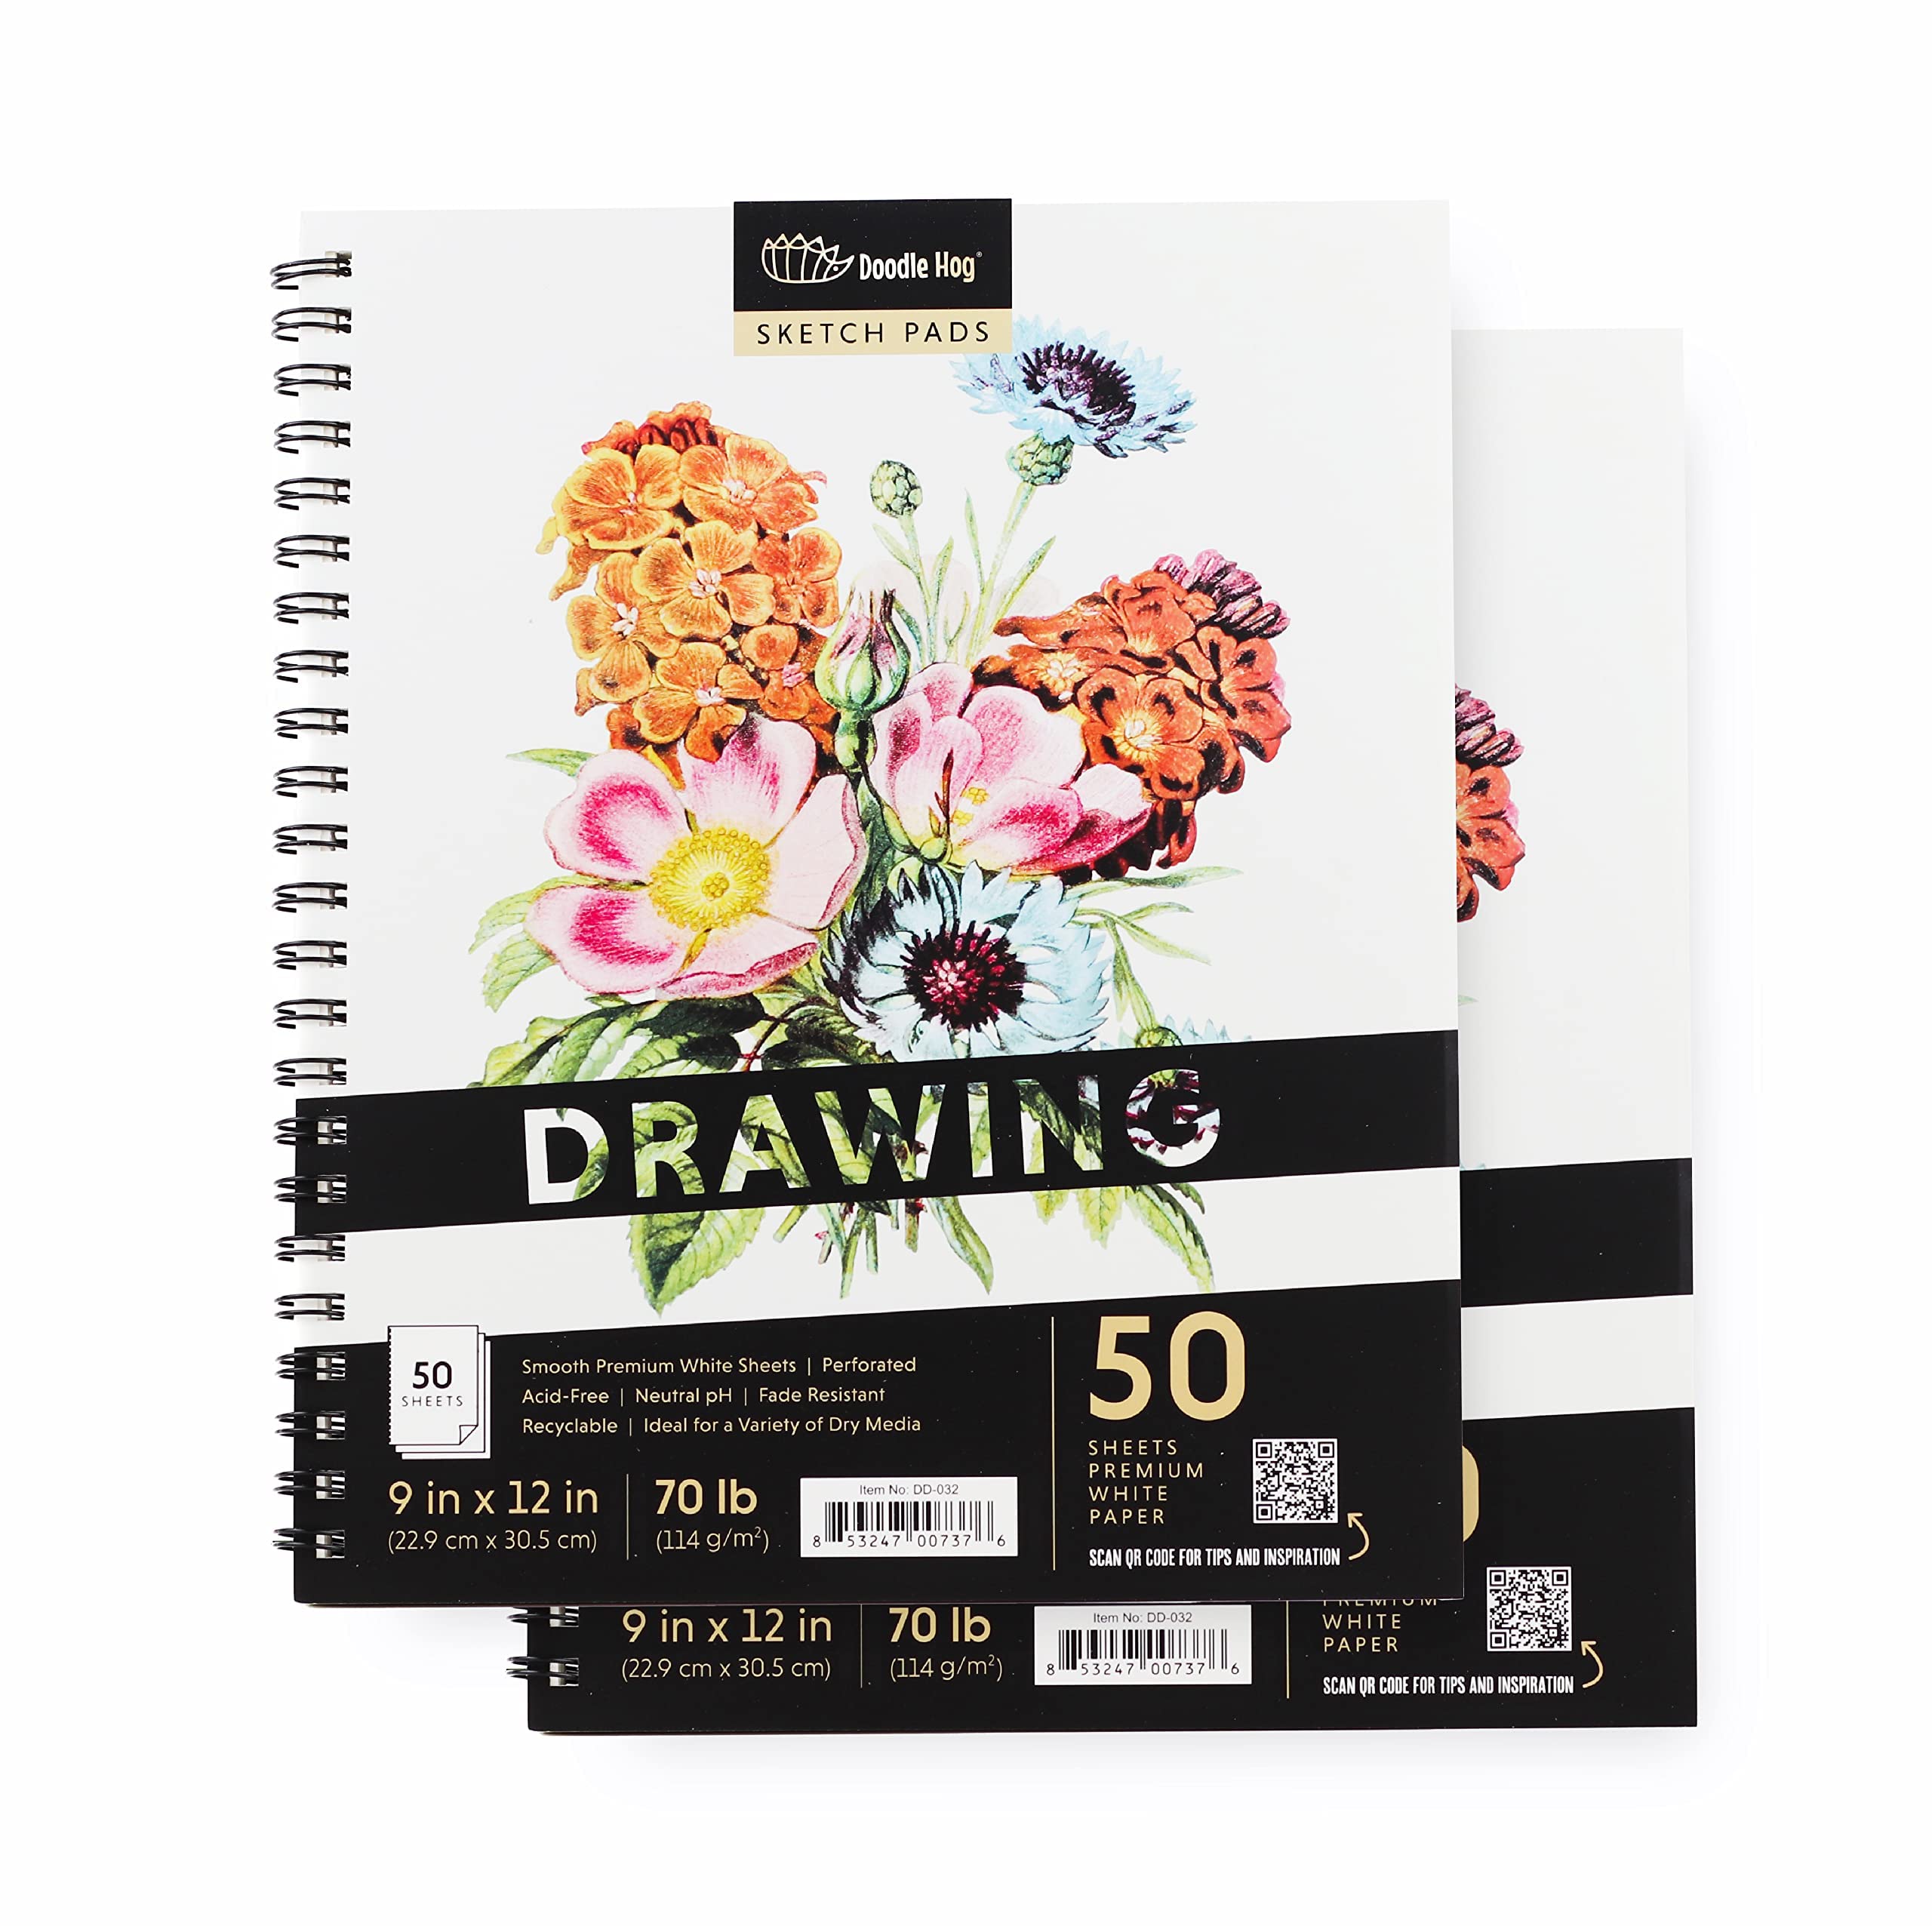 2PK Drawing Pads - 9x12 White, Perforated, 70lb / 114gsm Sketch Pad -  Includes 50 Sheets/Pad 100 Sheets Total, Ideal for a Variety of Dry Media -  Drawing Paper for Artists, Students